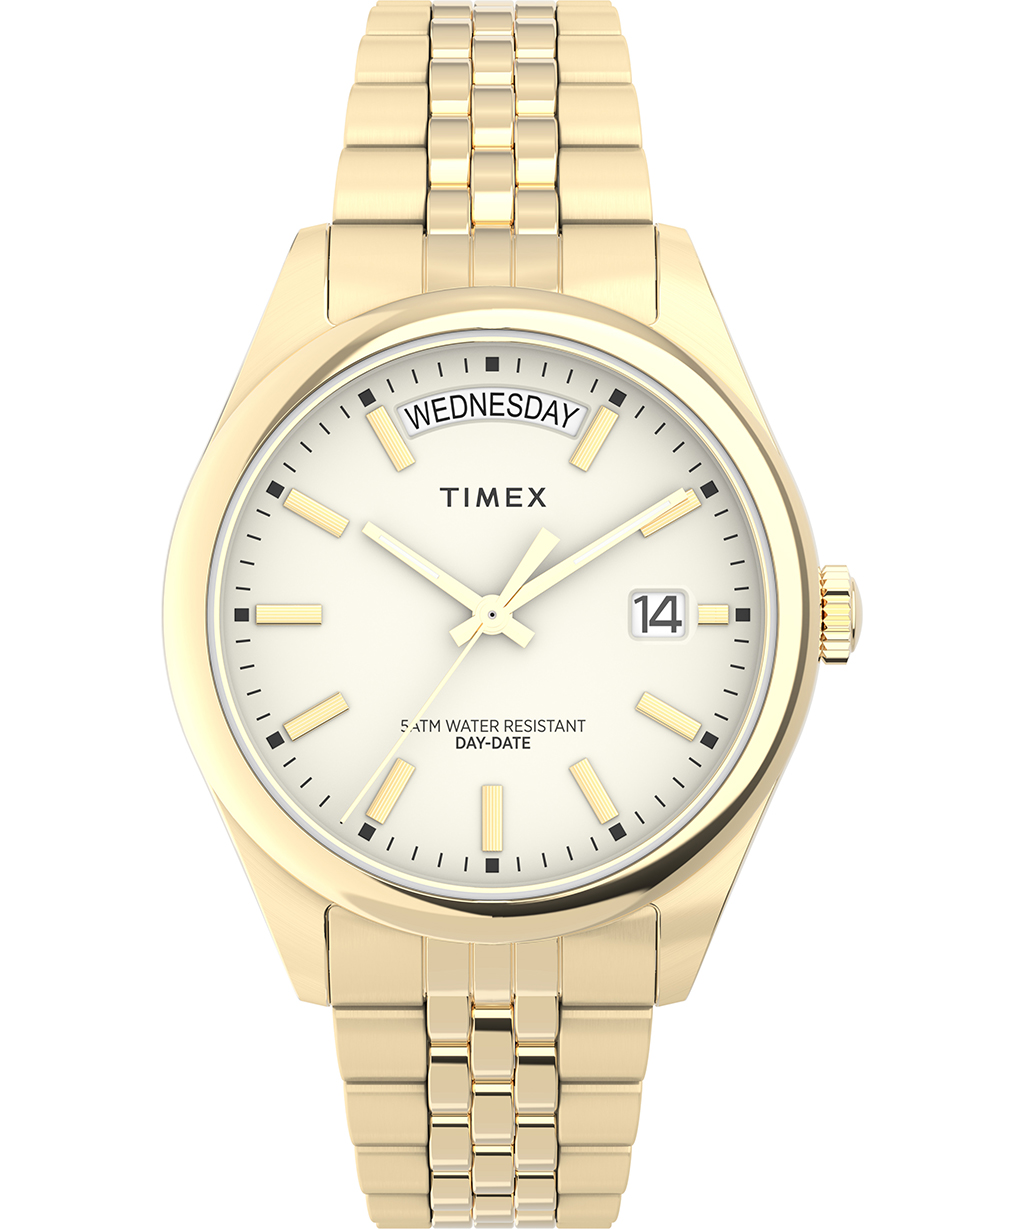 TIMEX Legacy Day and Date lifestyle